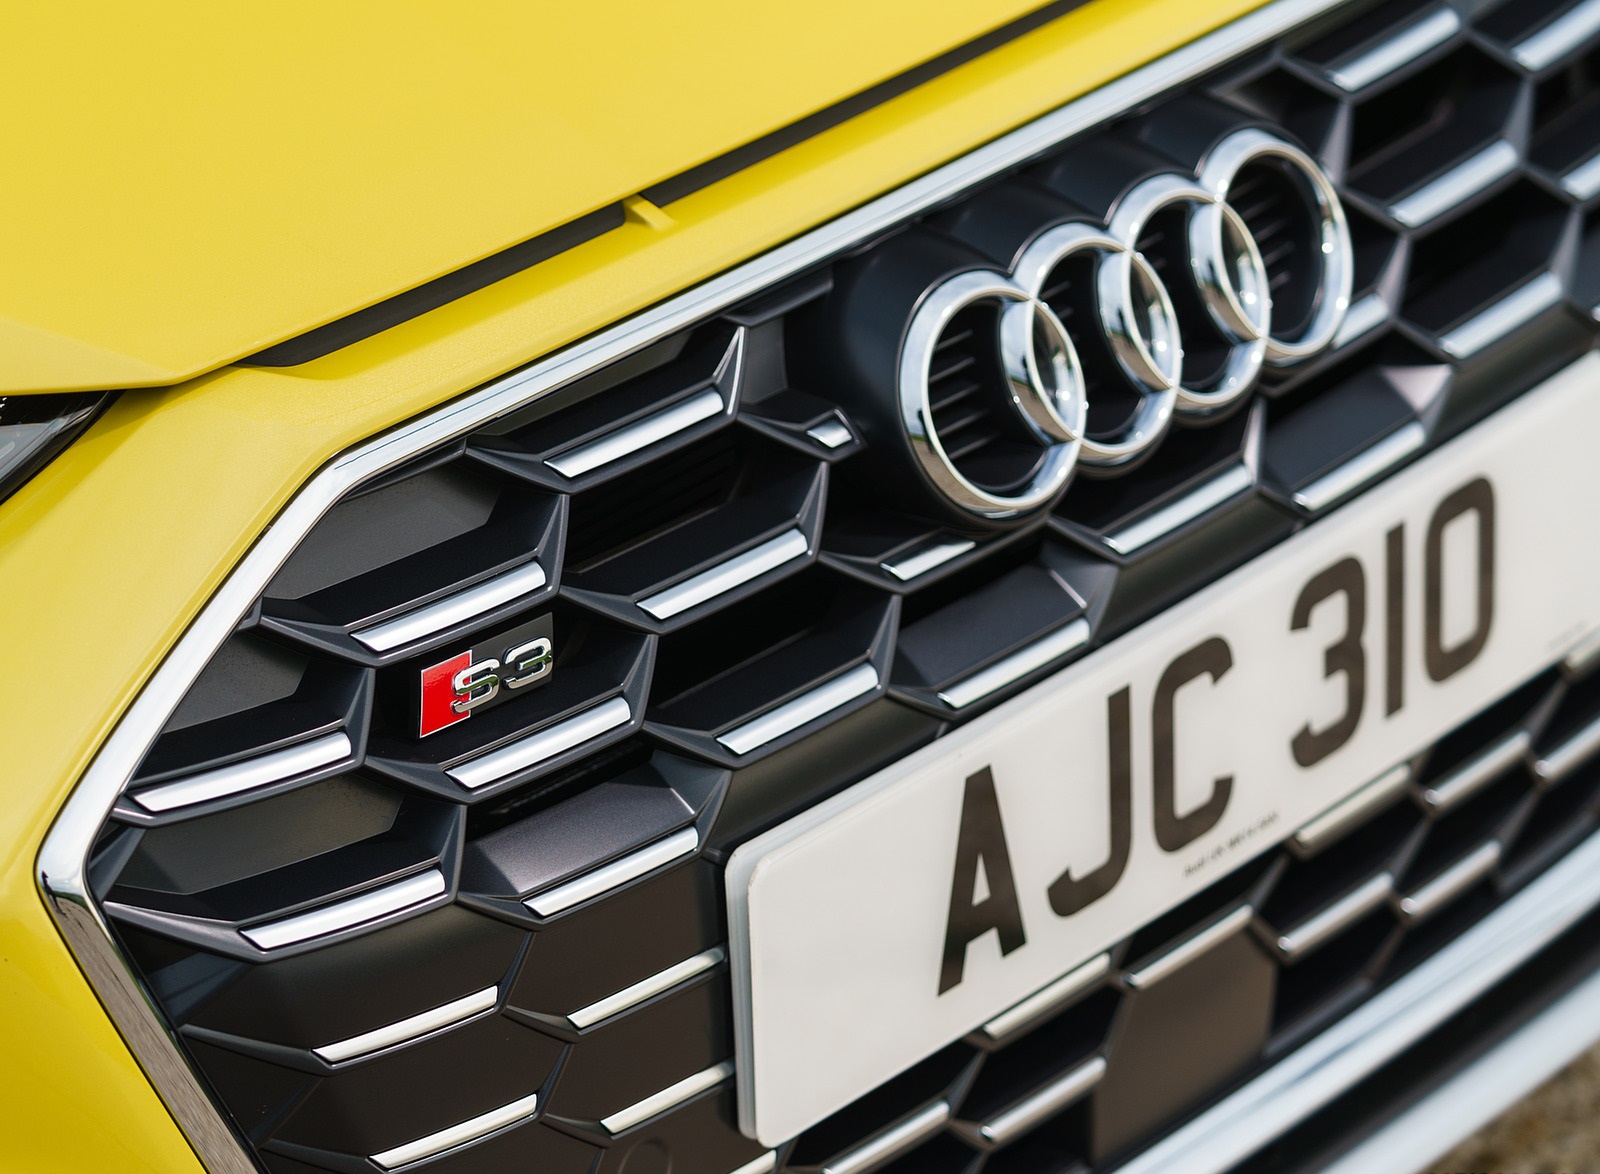 2021 Audi S3 Sportback (UK-Spec) Grill Wallpapers  #67 of 95